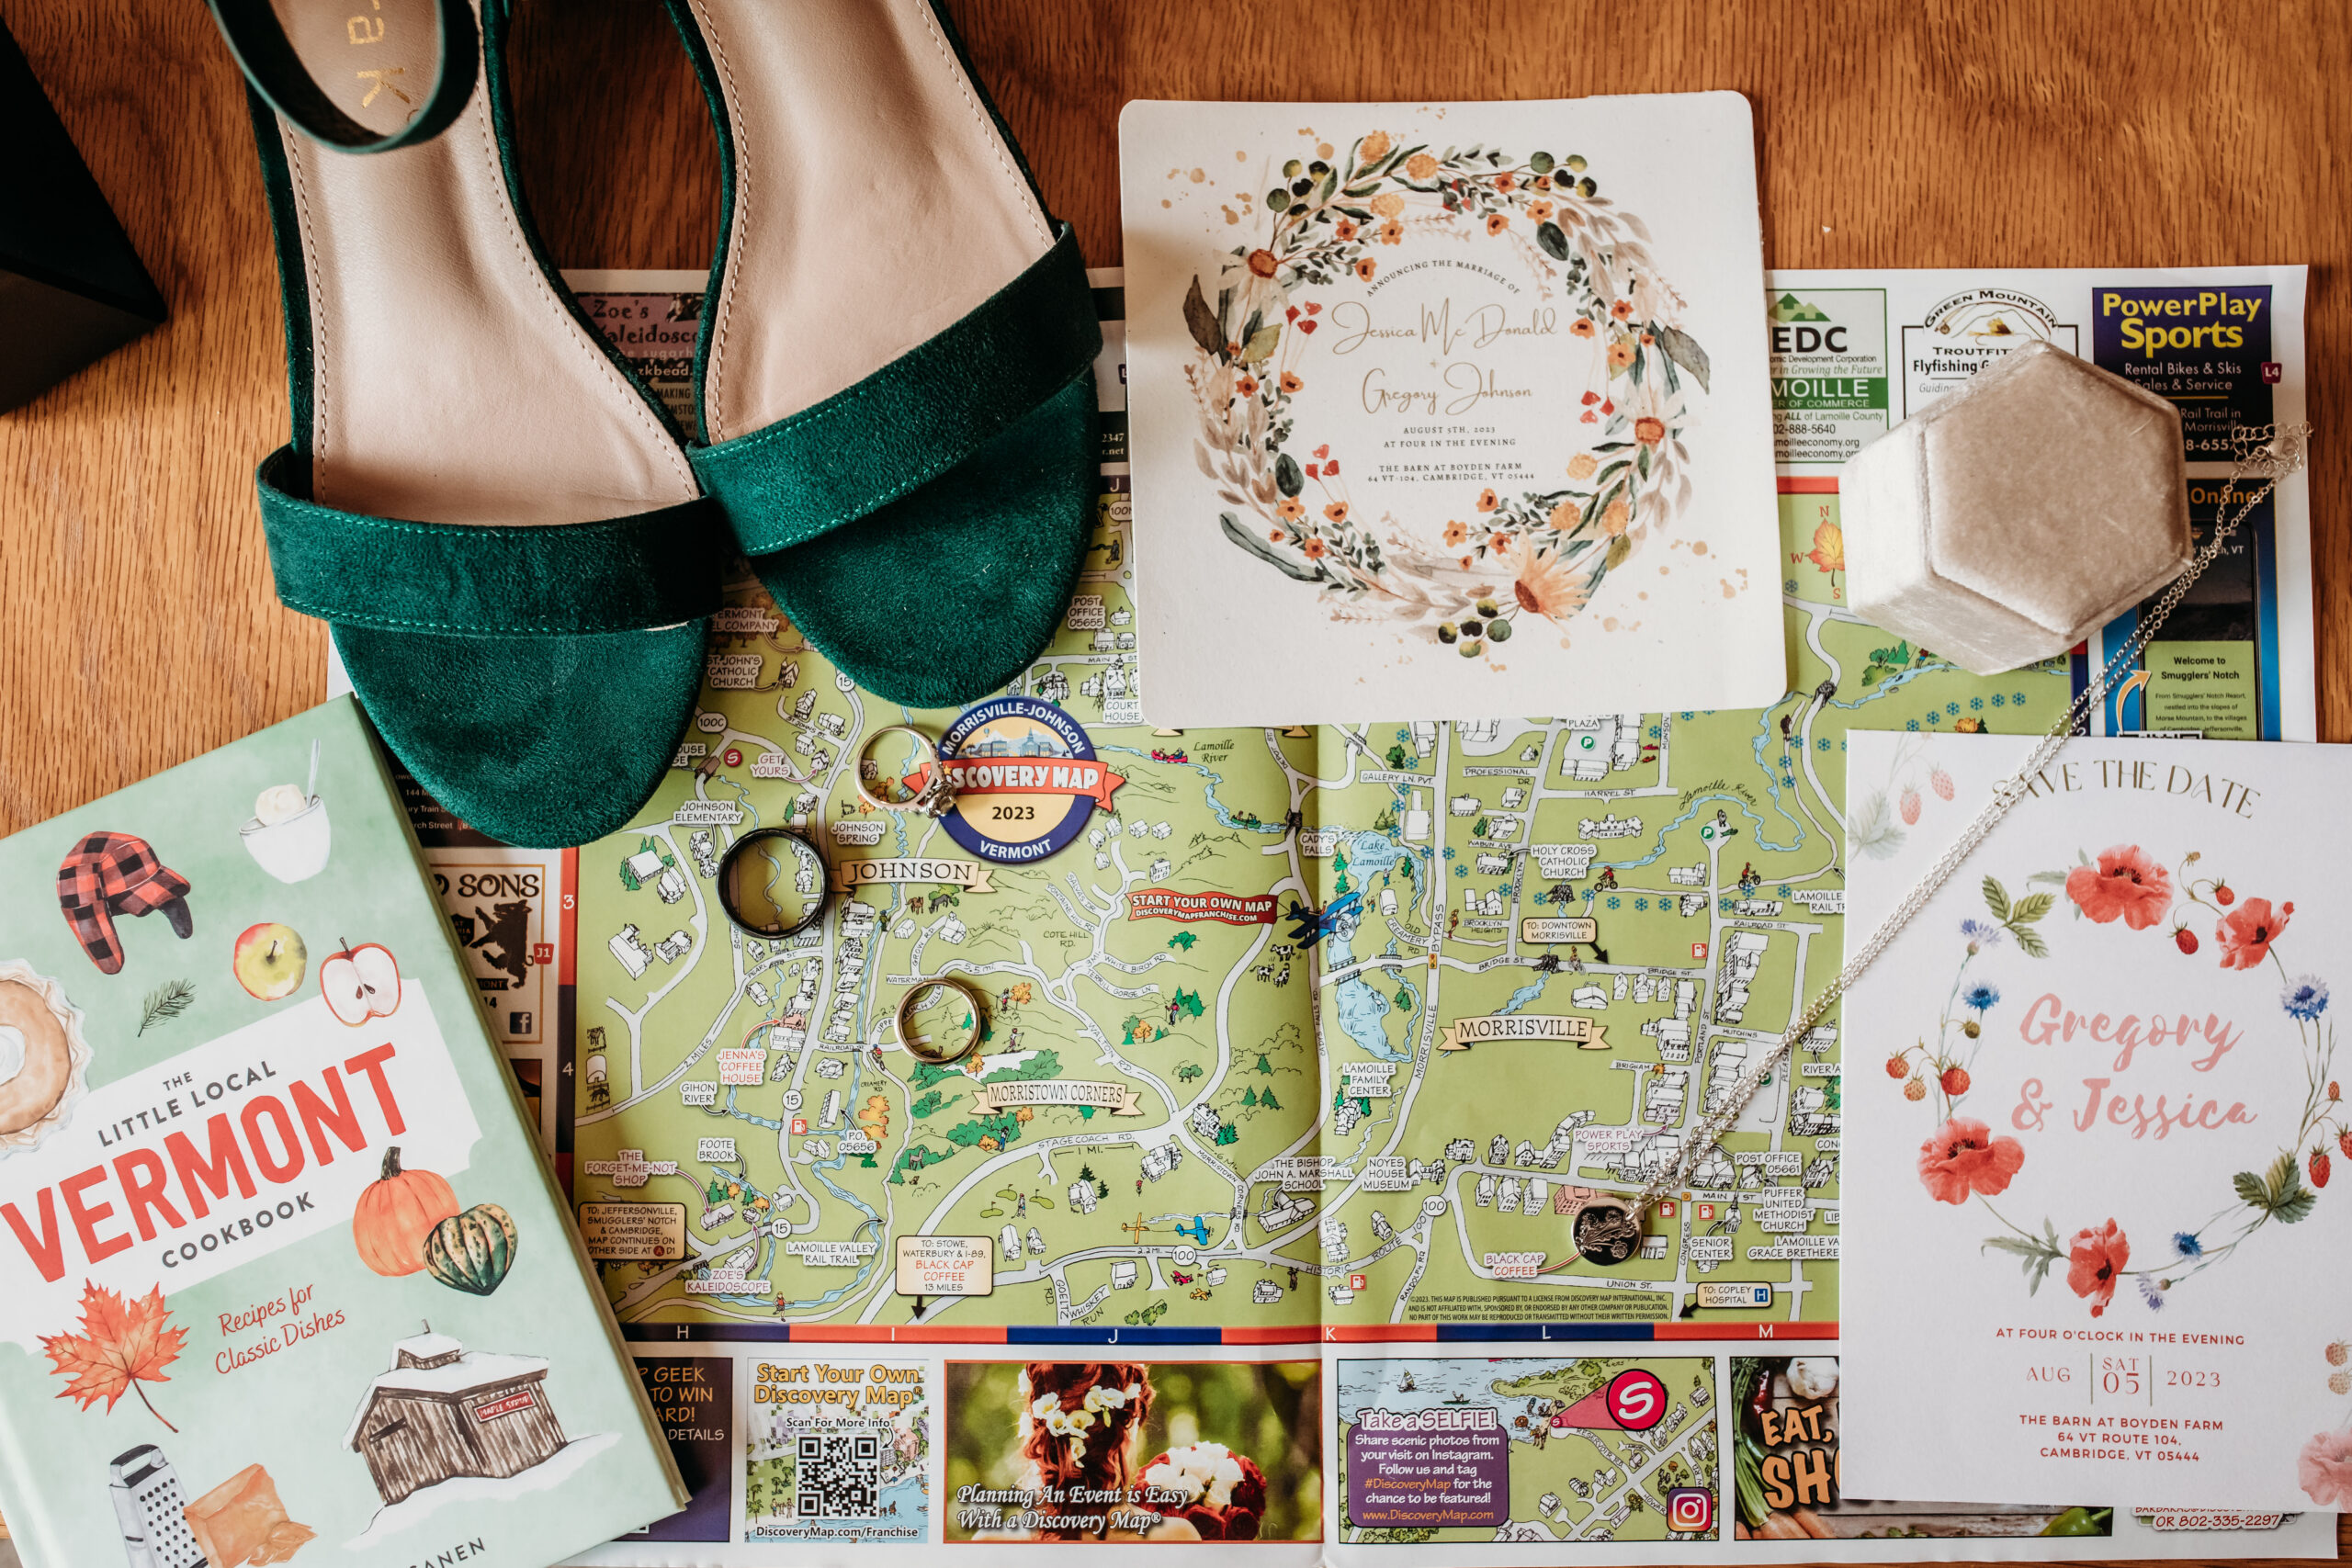 A pair of dark green suede heels, a save the date, a wedding invitation, a local map of northern Vermont, a Vermont cookbook, and wedding jewelry in a flat lay on a wooden table